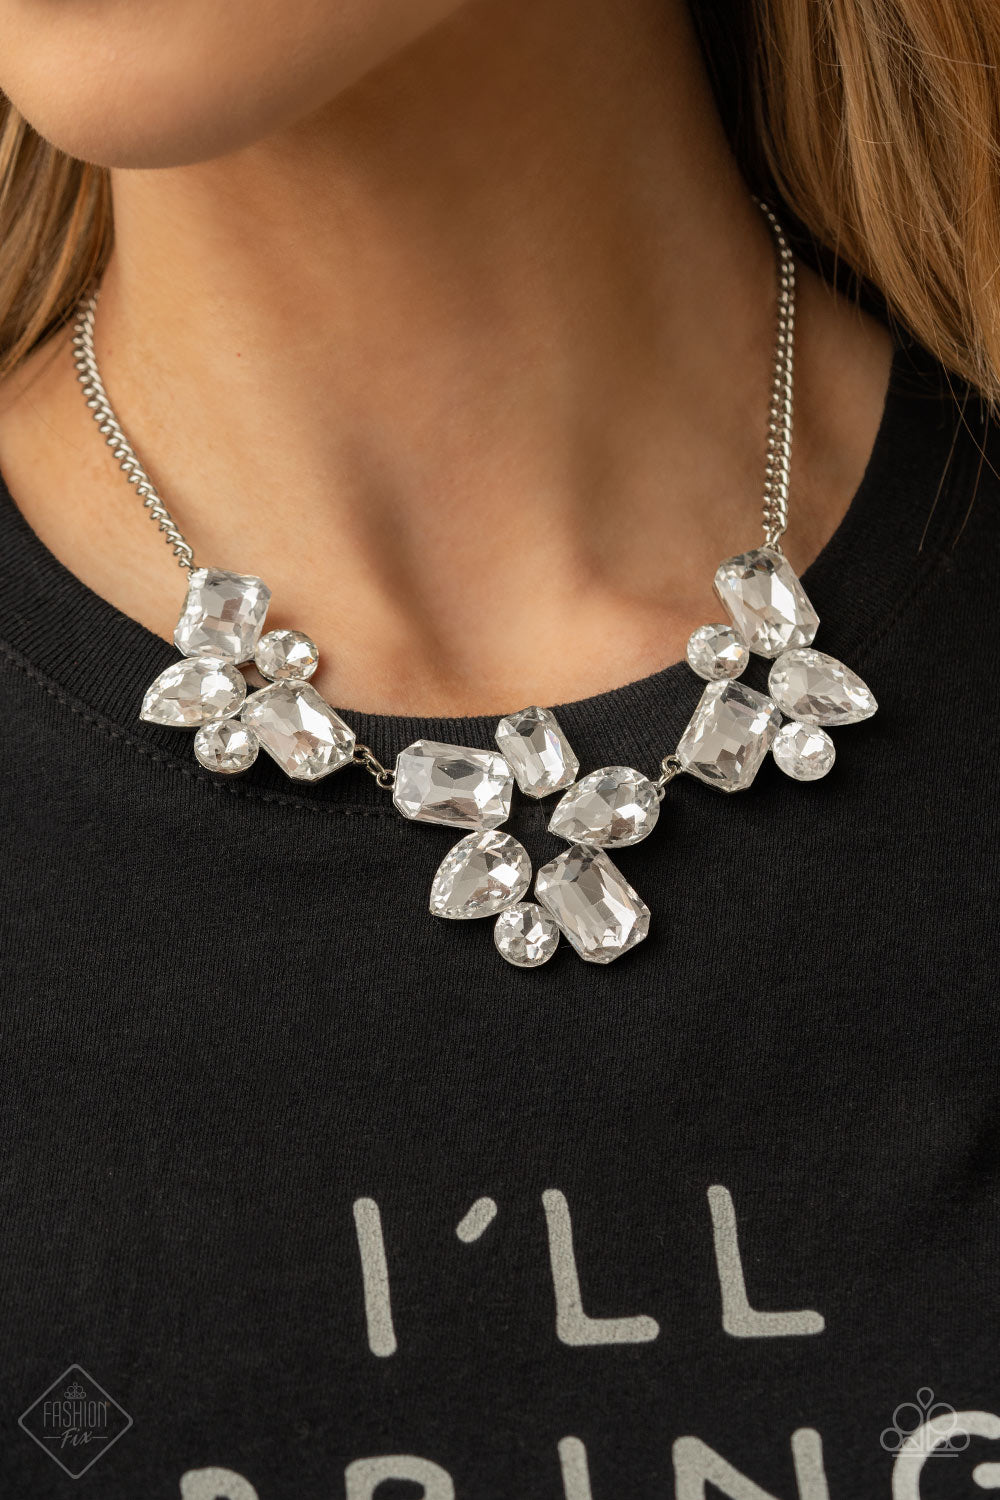 Paparazzi Galactic Goddess White Necklace. #P2ST-WTXX-097ZV. Get Free Shipping!